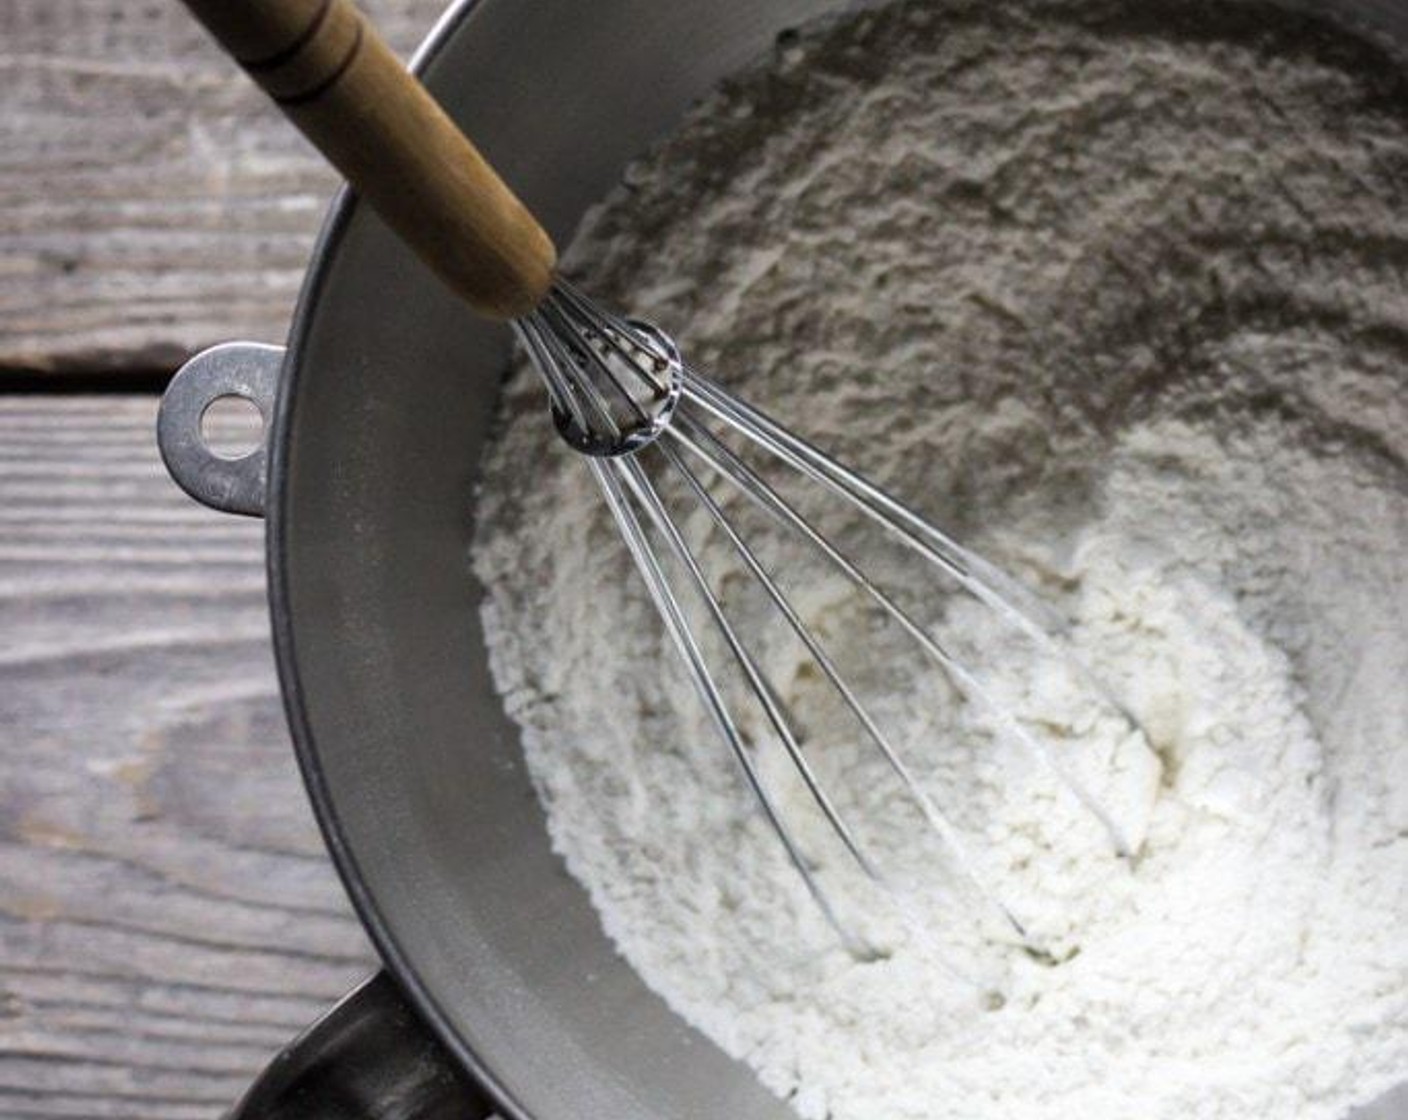 step 4 Add Gluten-Free Pastry Flour (3 cups), Cream of Tartar (1/4 tsp), and Instant Dry Yeast (1/2 Tbsp) to the bowl of a stand mixer and use a handheld whisk to combine.